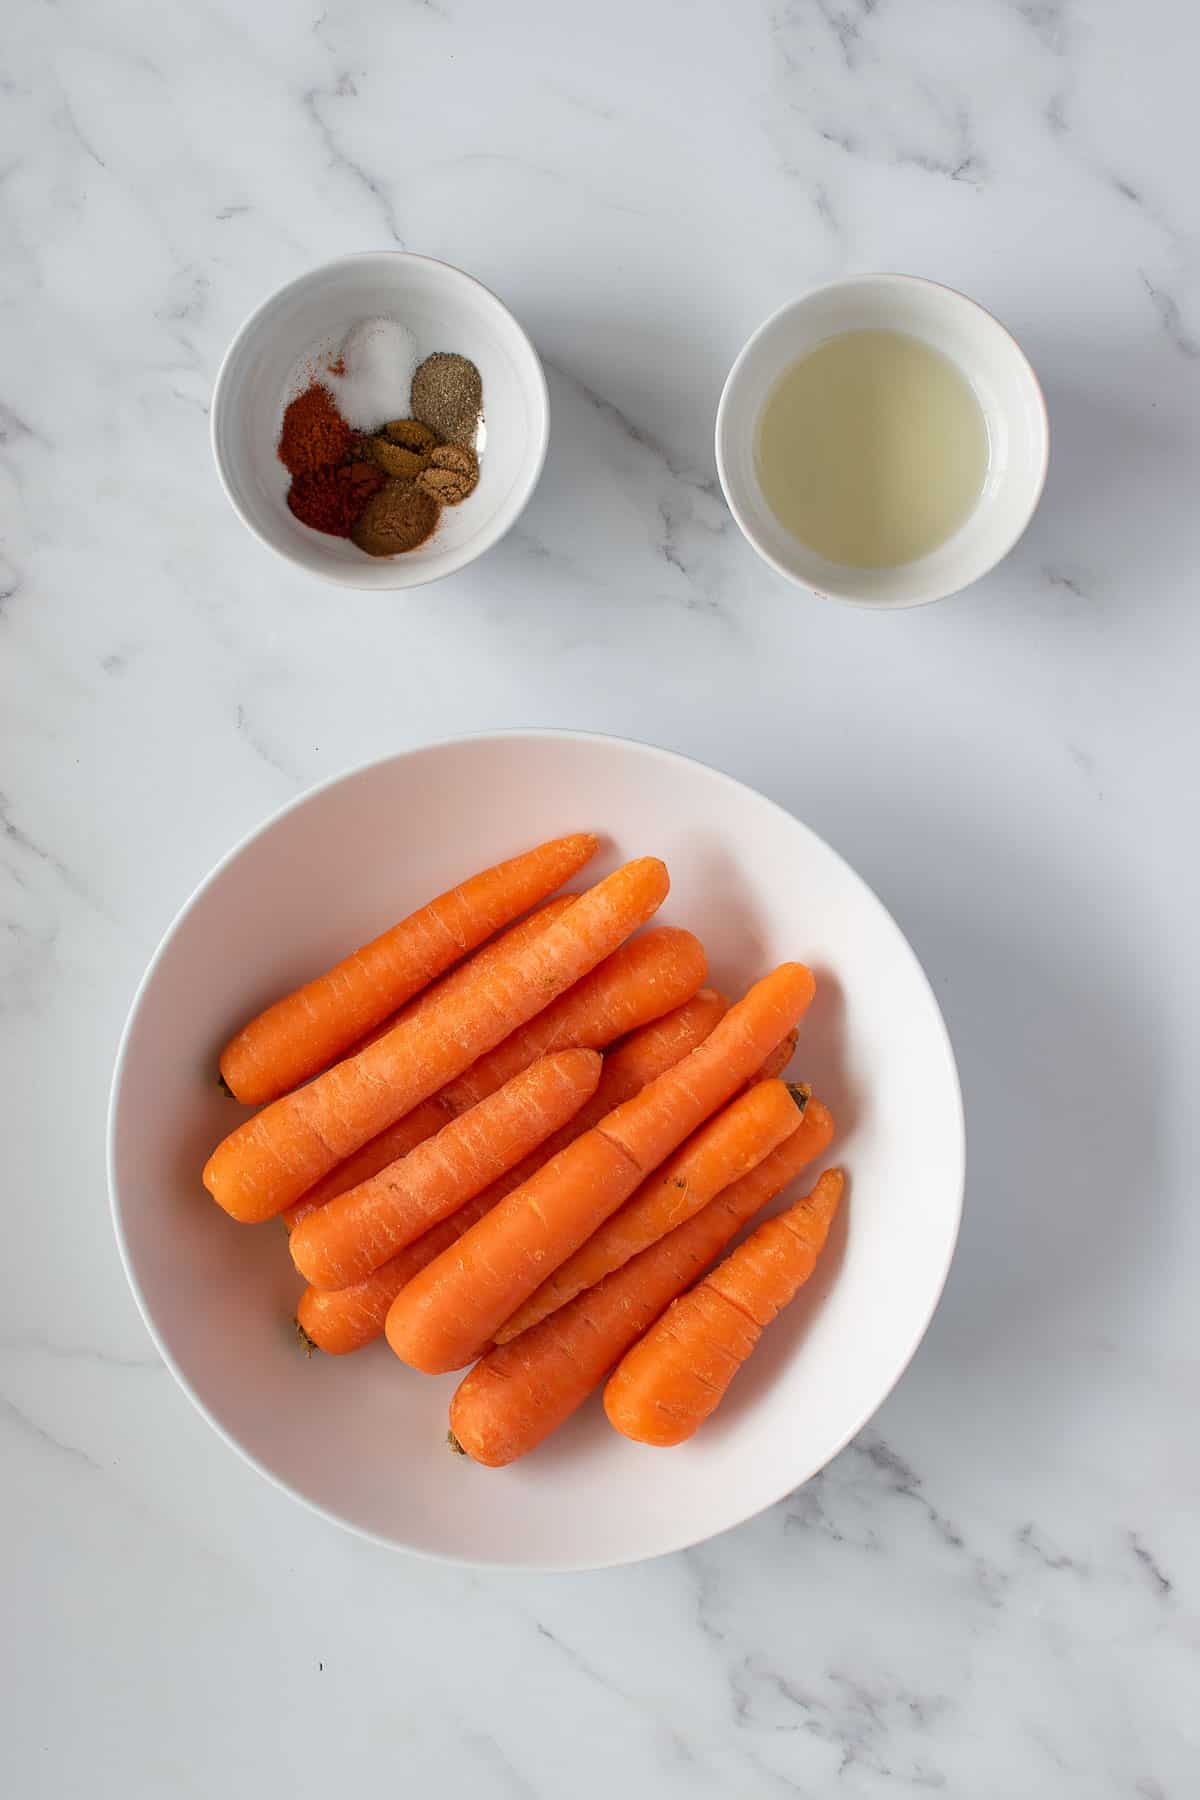 Bowls of carrots, olive oil and spices on a table.